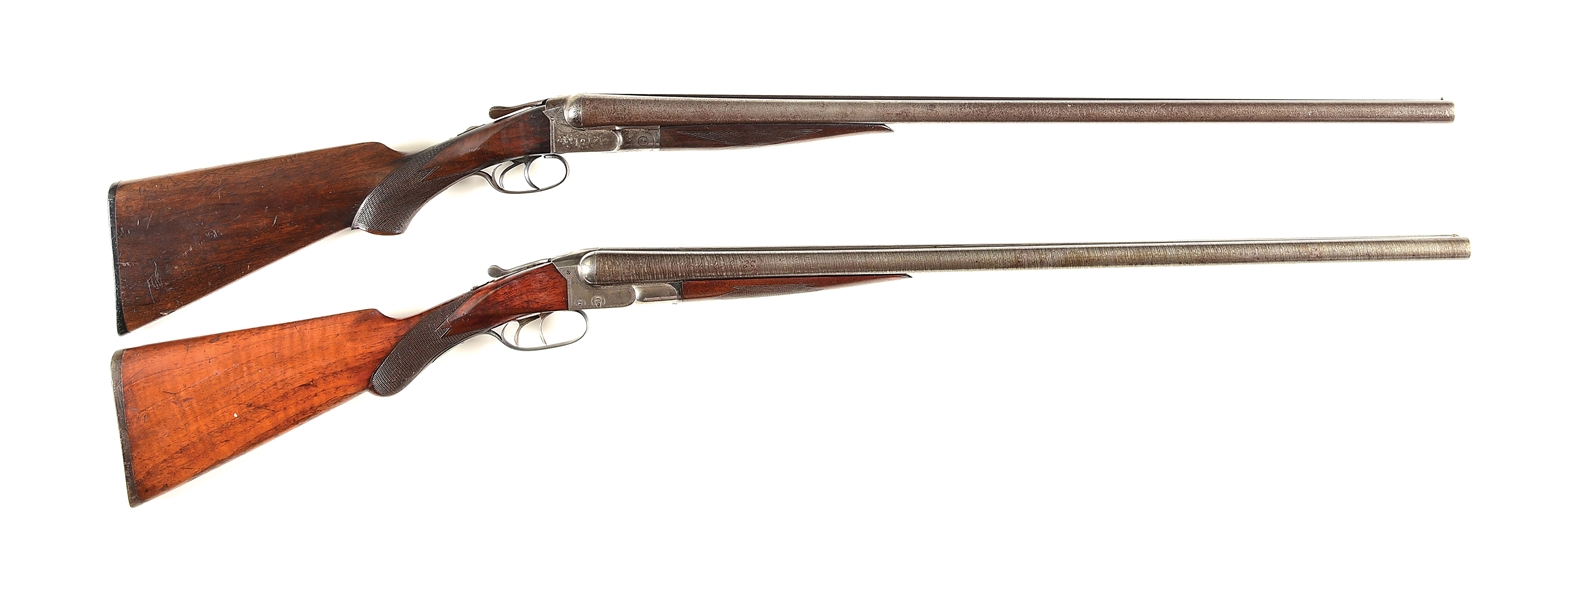 (C) LOT OF 2: SYRACUSE ARMS CO. AND W.A. ABEL & CO. SIDE BY SIDE SHOTGUNS.